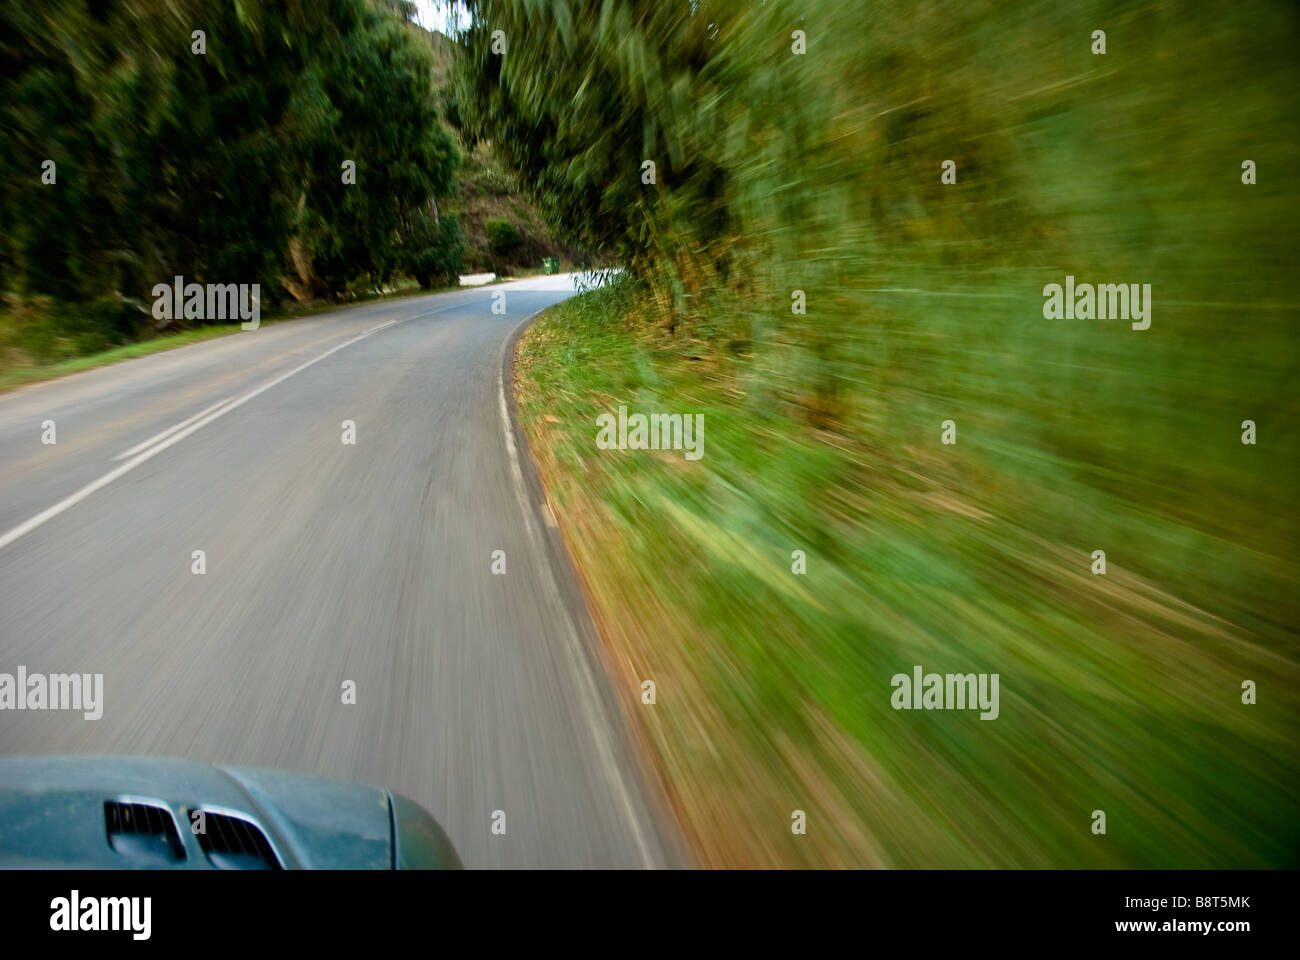 A car speeding  along a road in Costa Vicentina National Park in The Algarve region of Portugal. Stock Photo